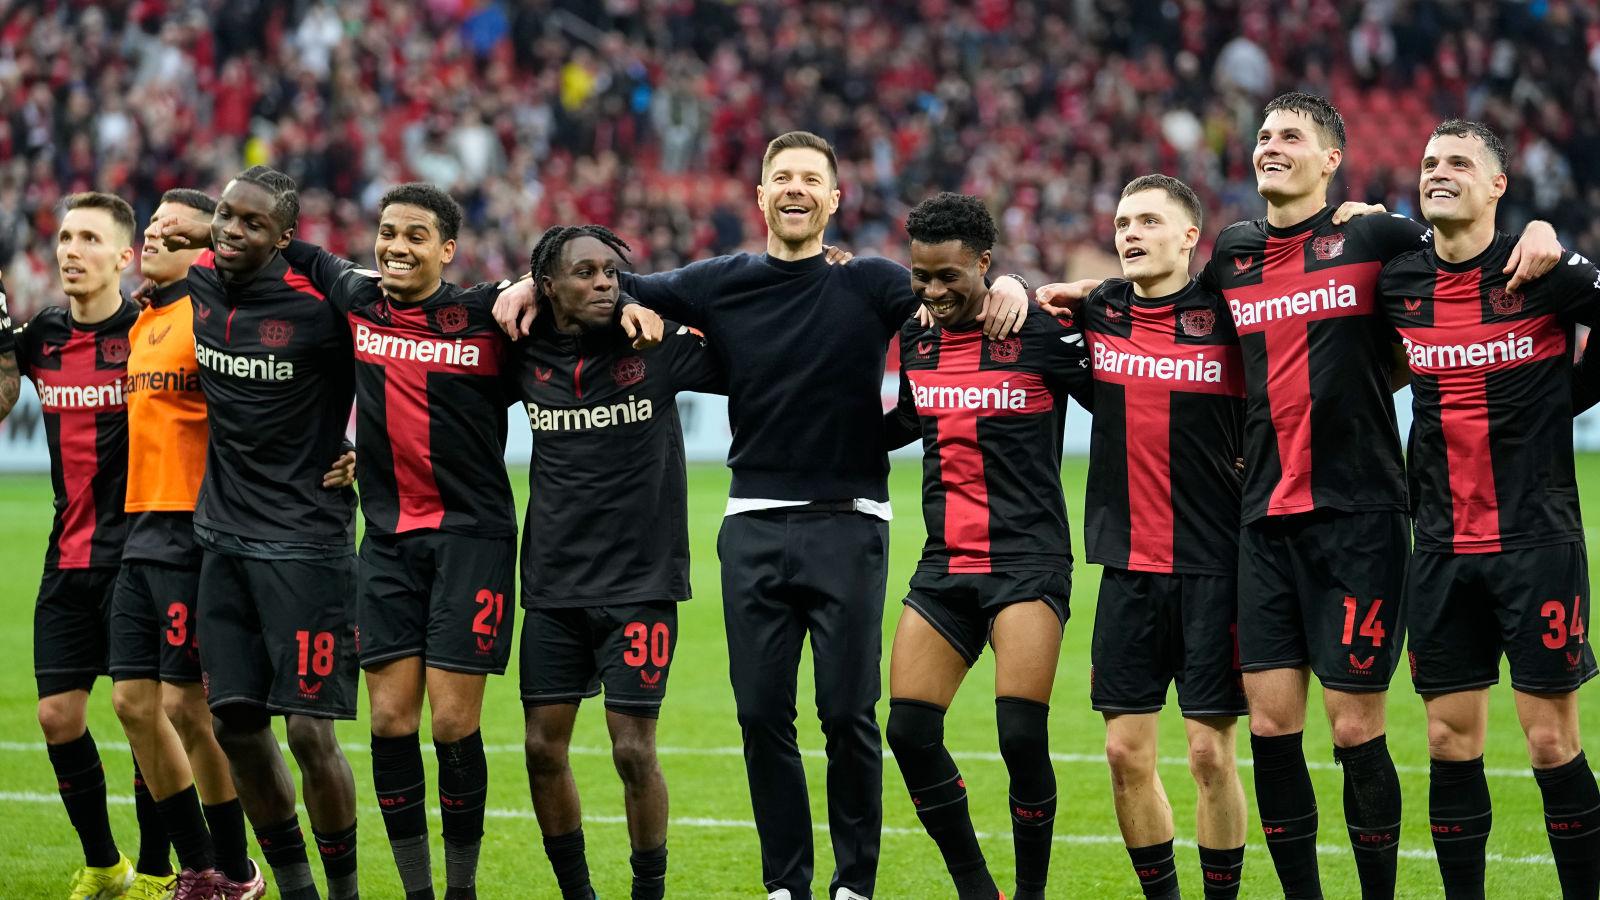 Bayer Leverkusen are closing in on their first ever Bundesliga title